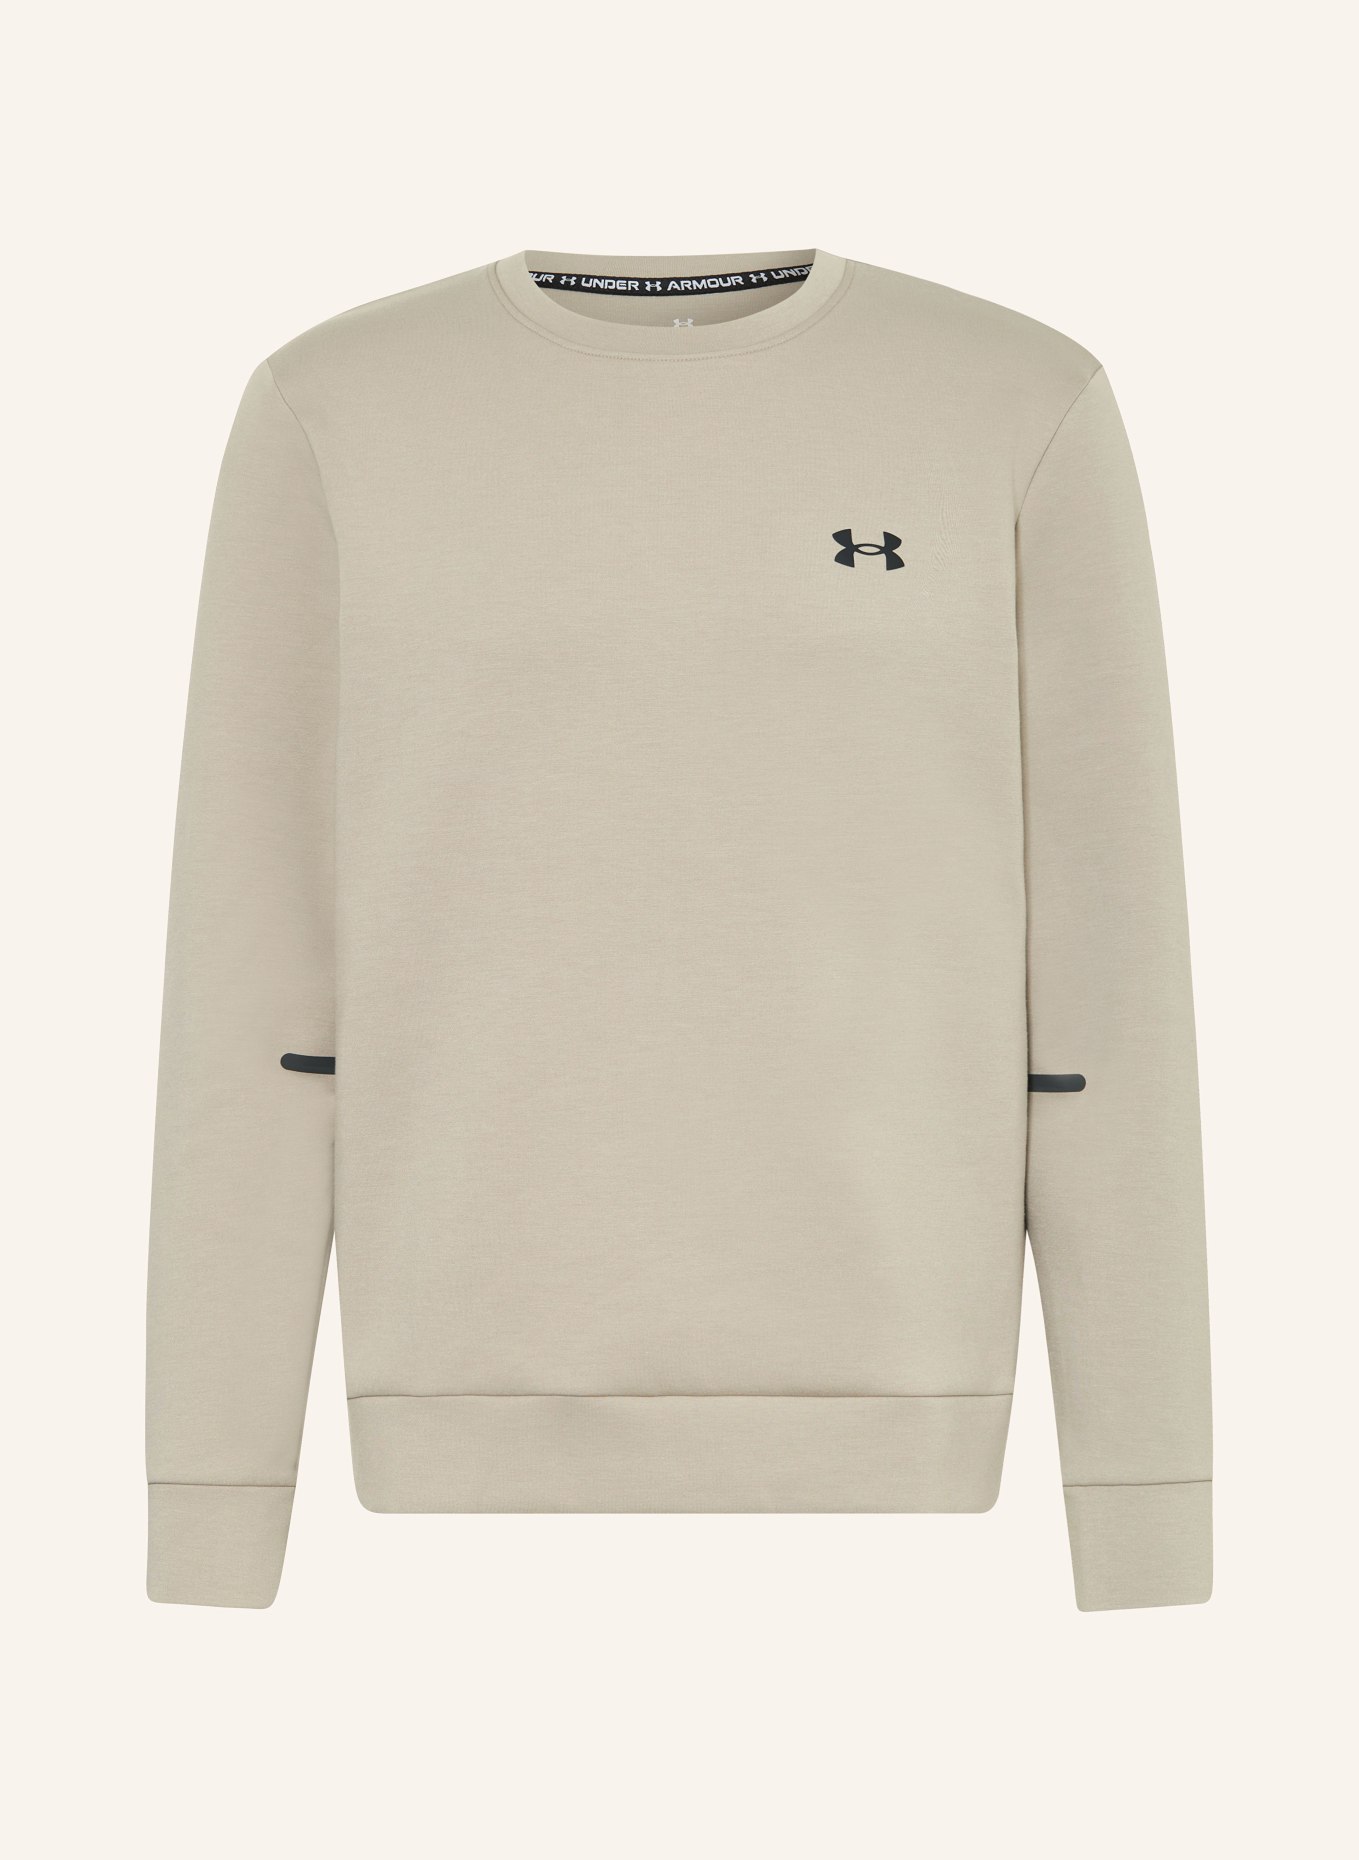 UNDER ARMOUR Sweatshirt UNSTOPPABLE, Farbe: TAUPE (Bild 1)